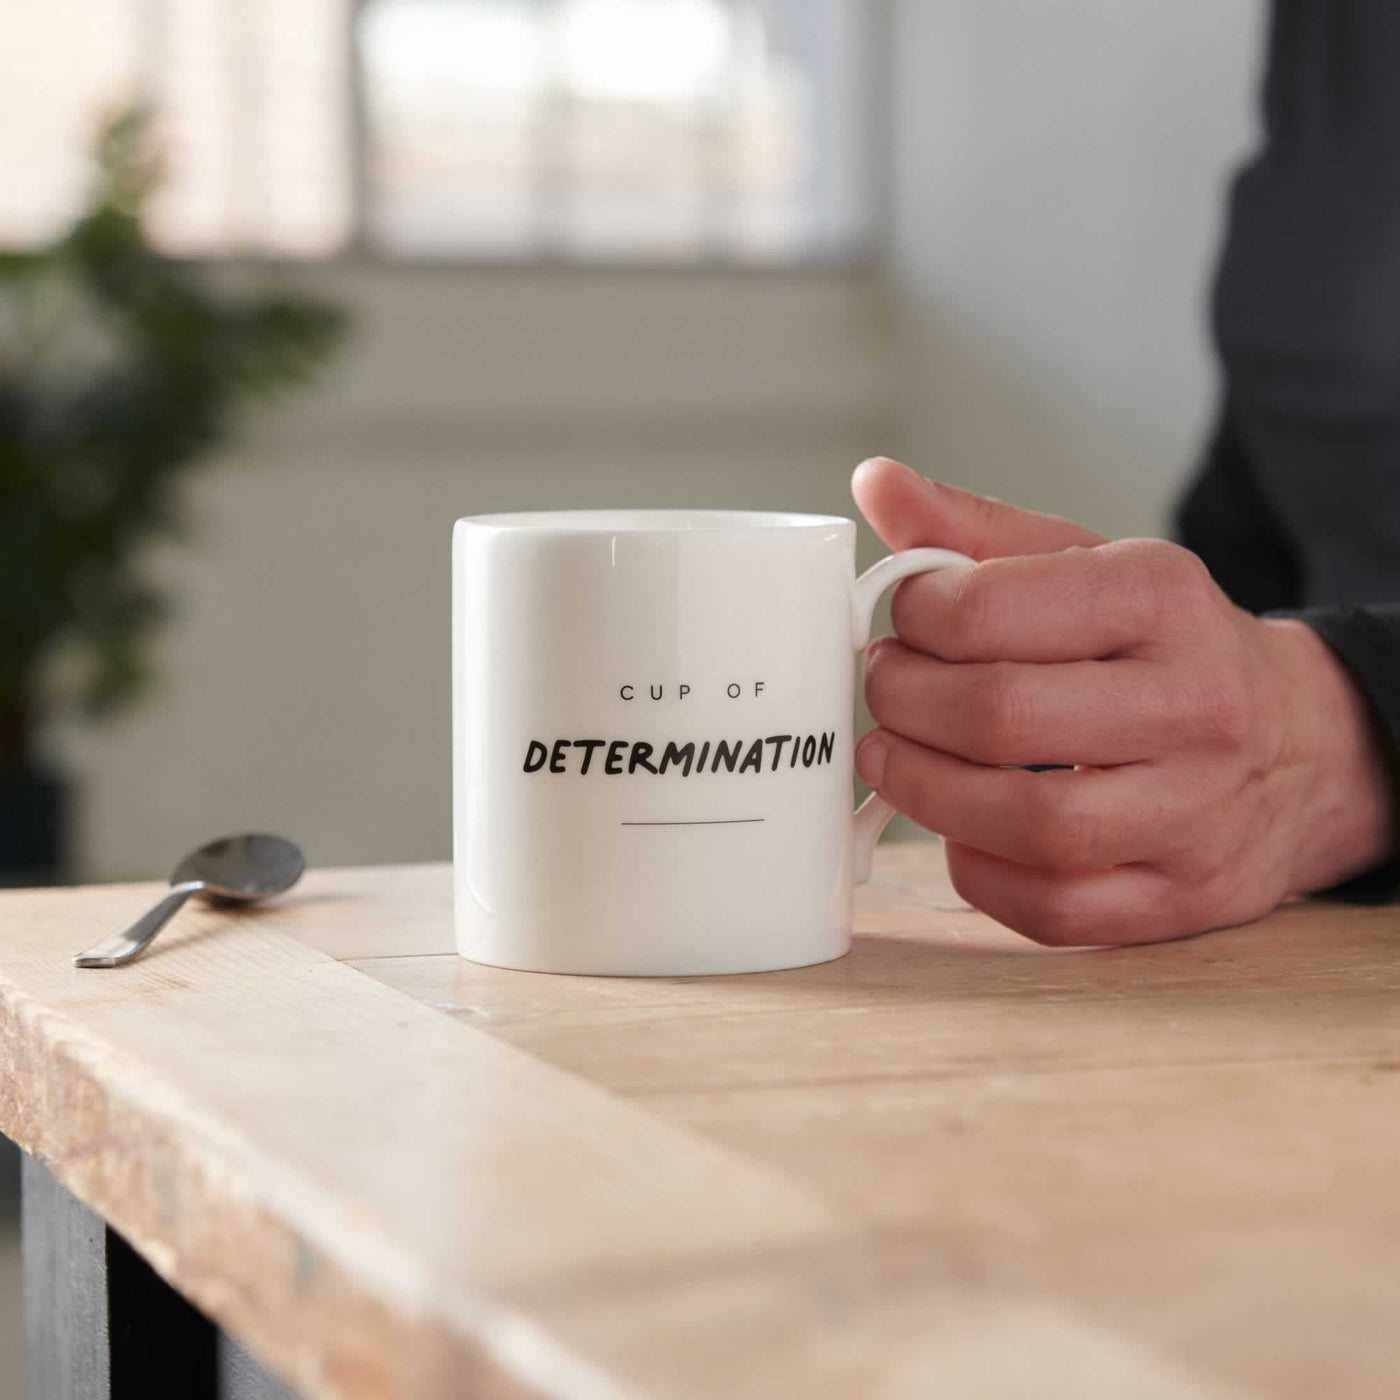 Cup of Determination Mug on table with hand